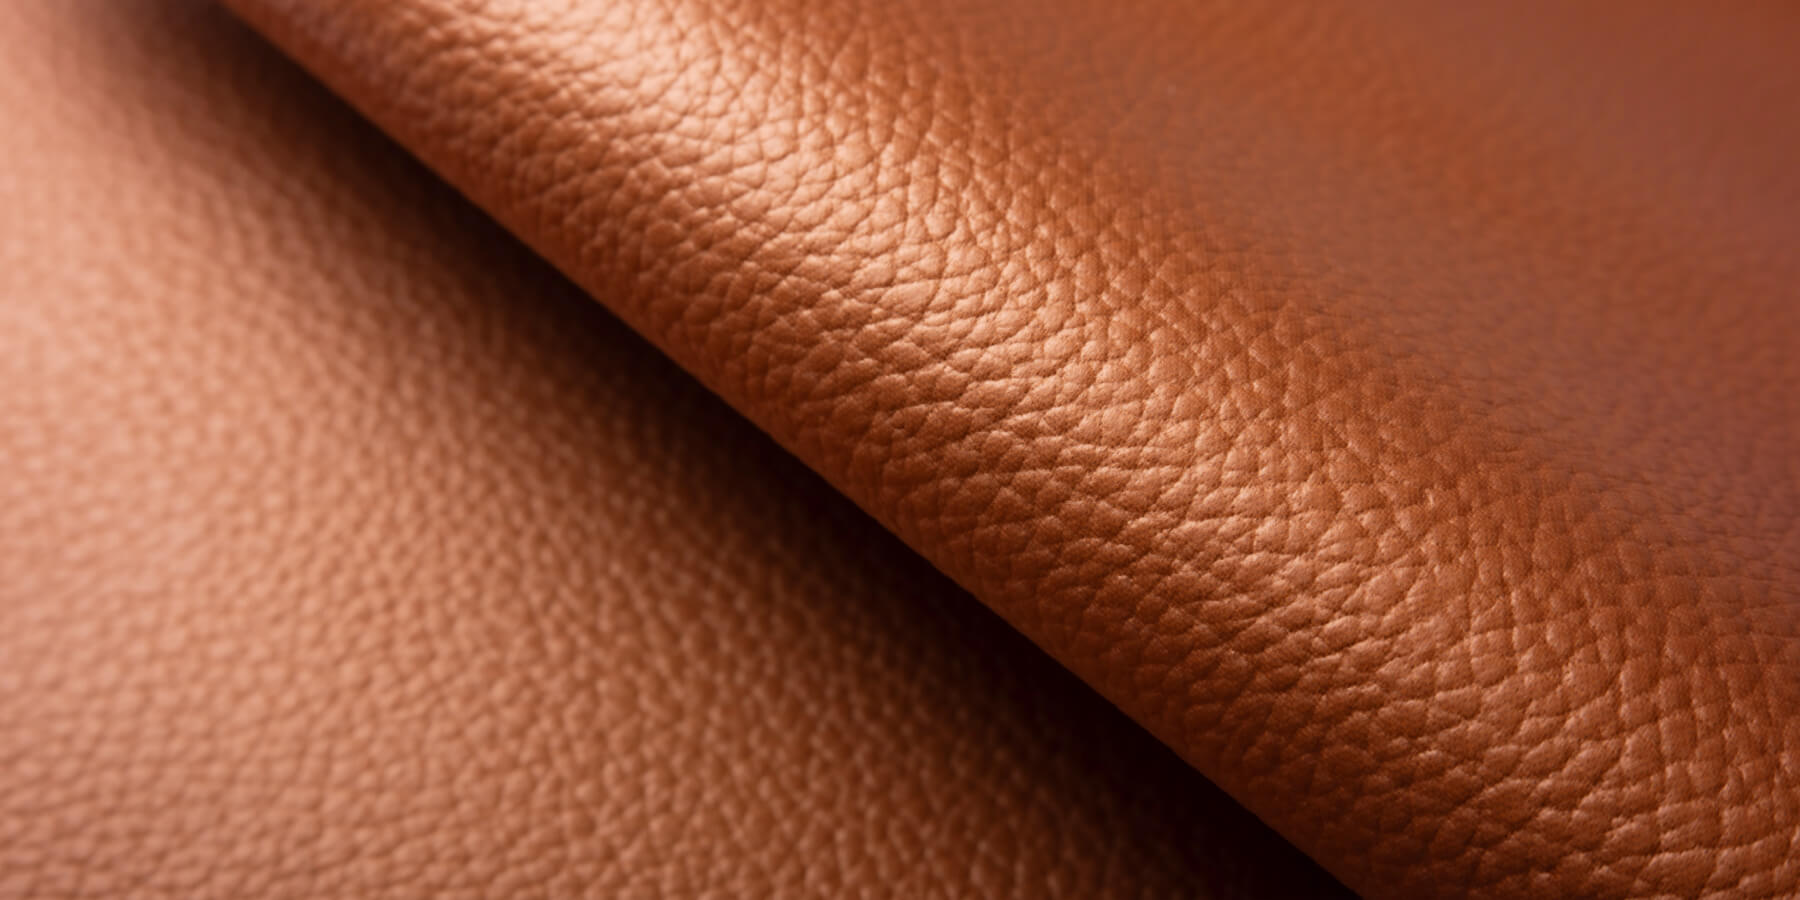 QUARTECH – Earth-friendly, leather-like textile material